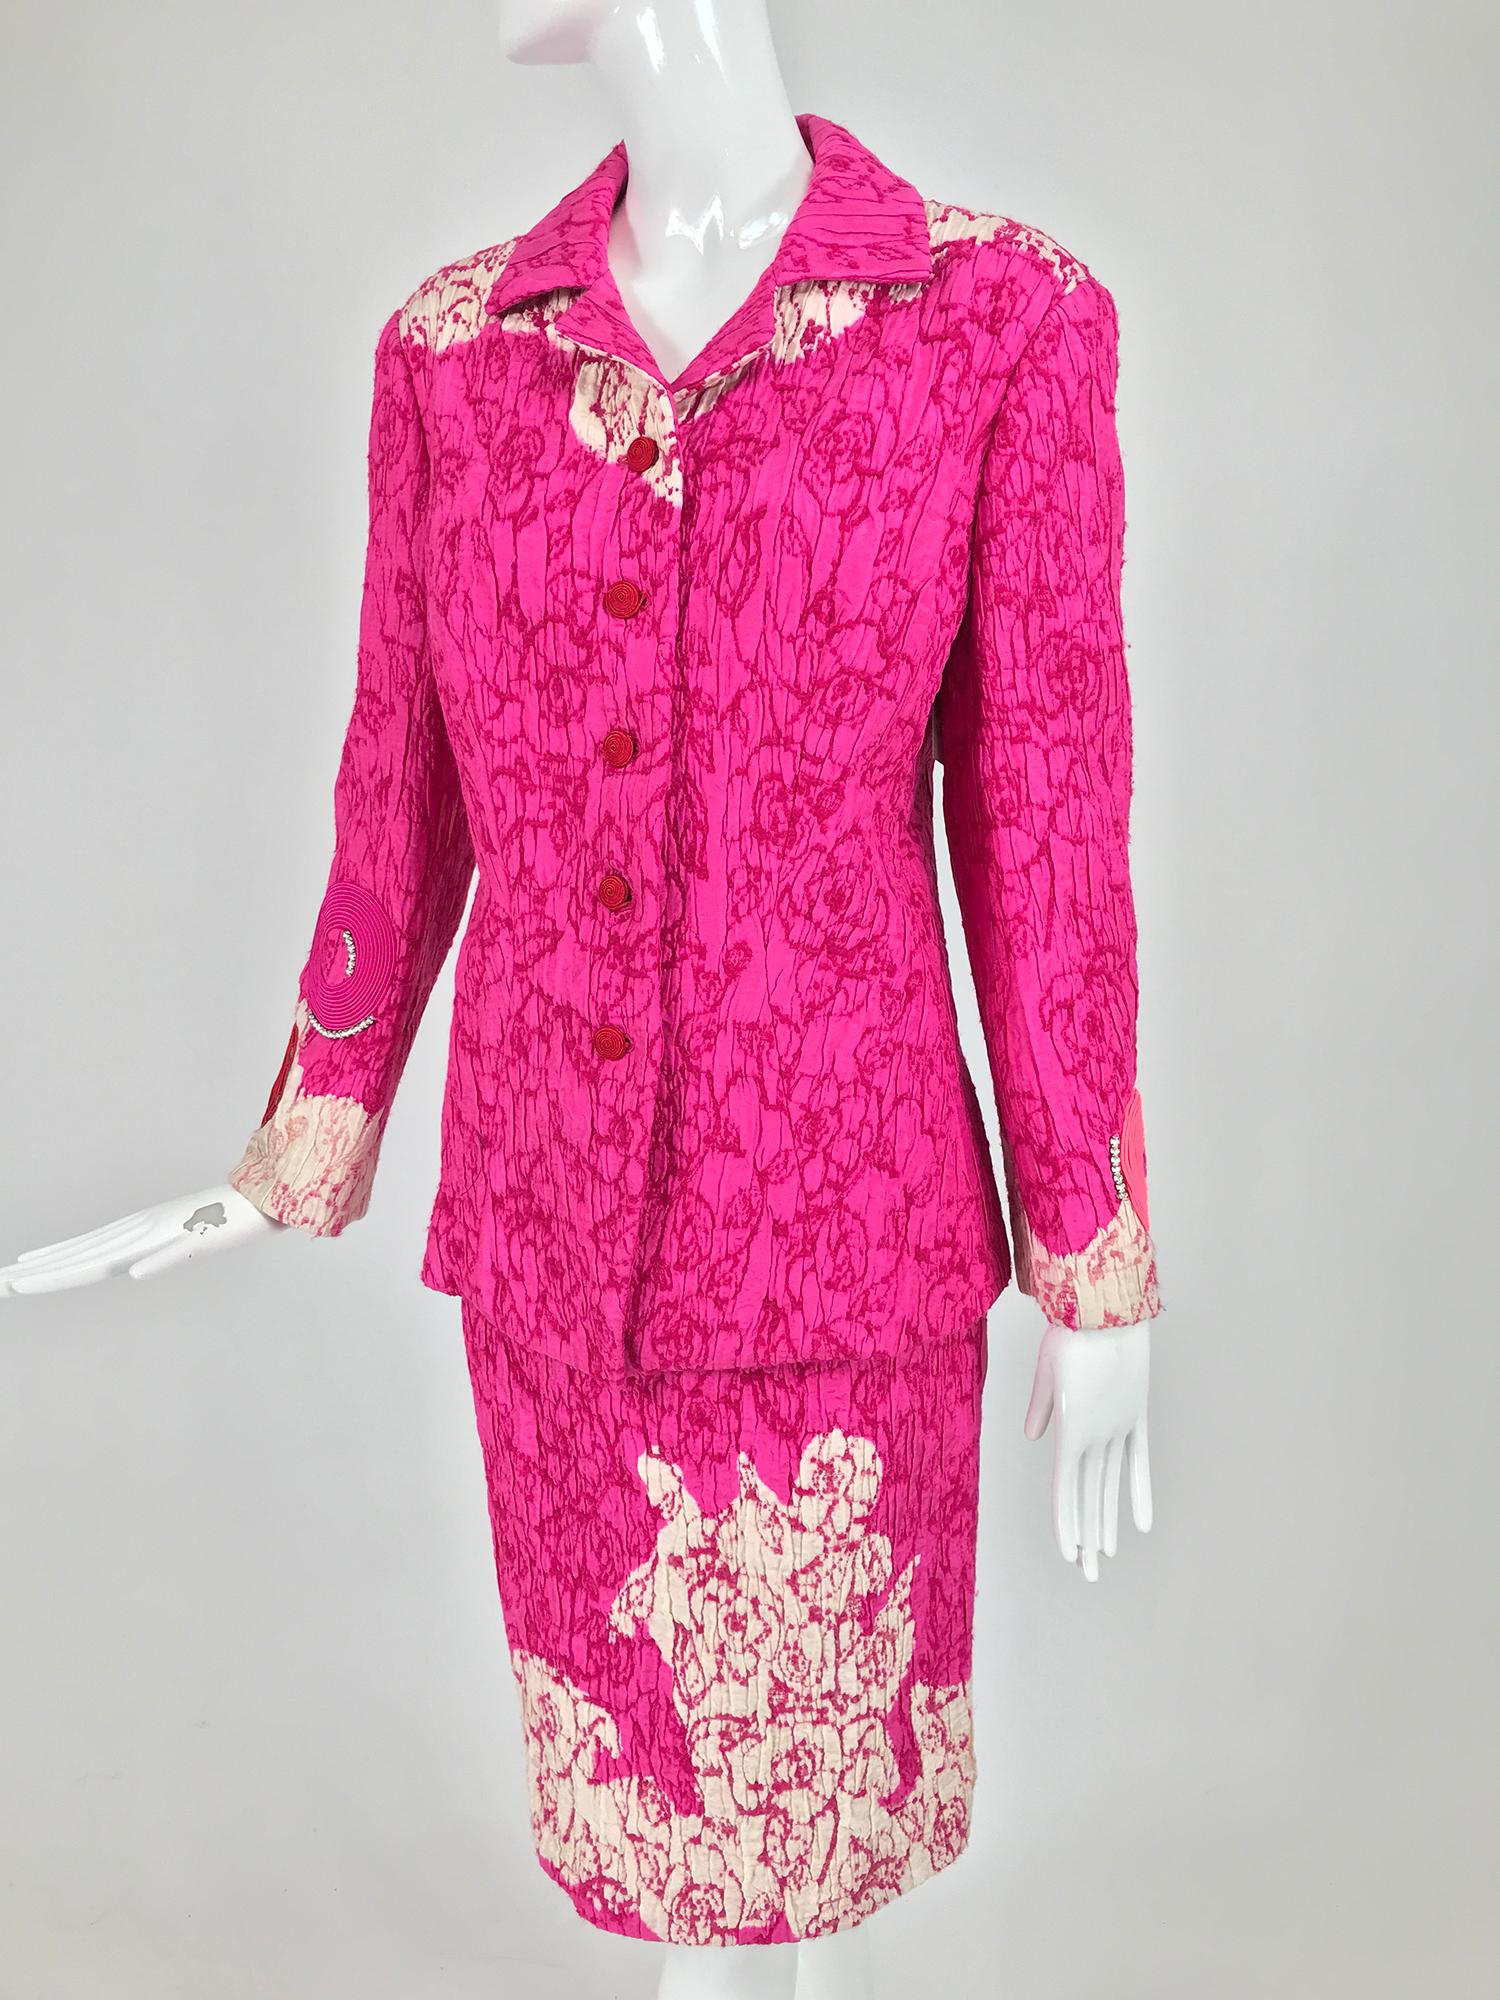 Christian Lacroix Pink Embroidered Silk Applique Skirt Suit 1990s For ...